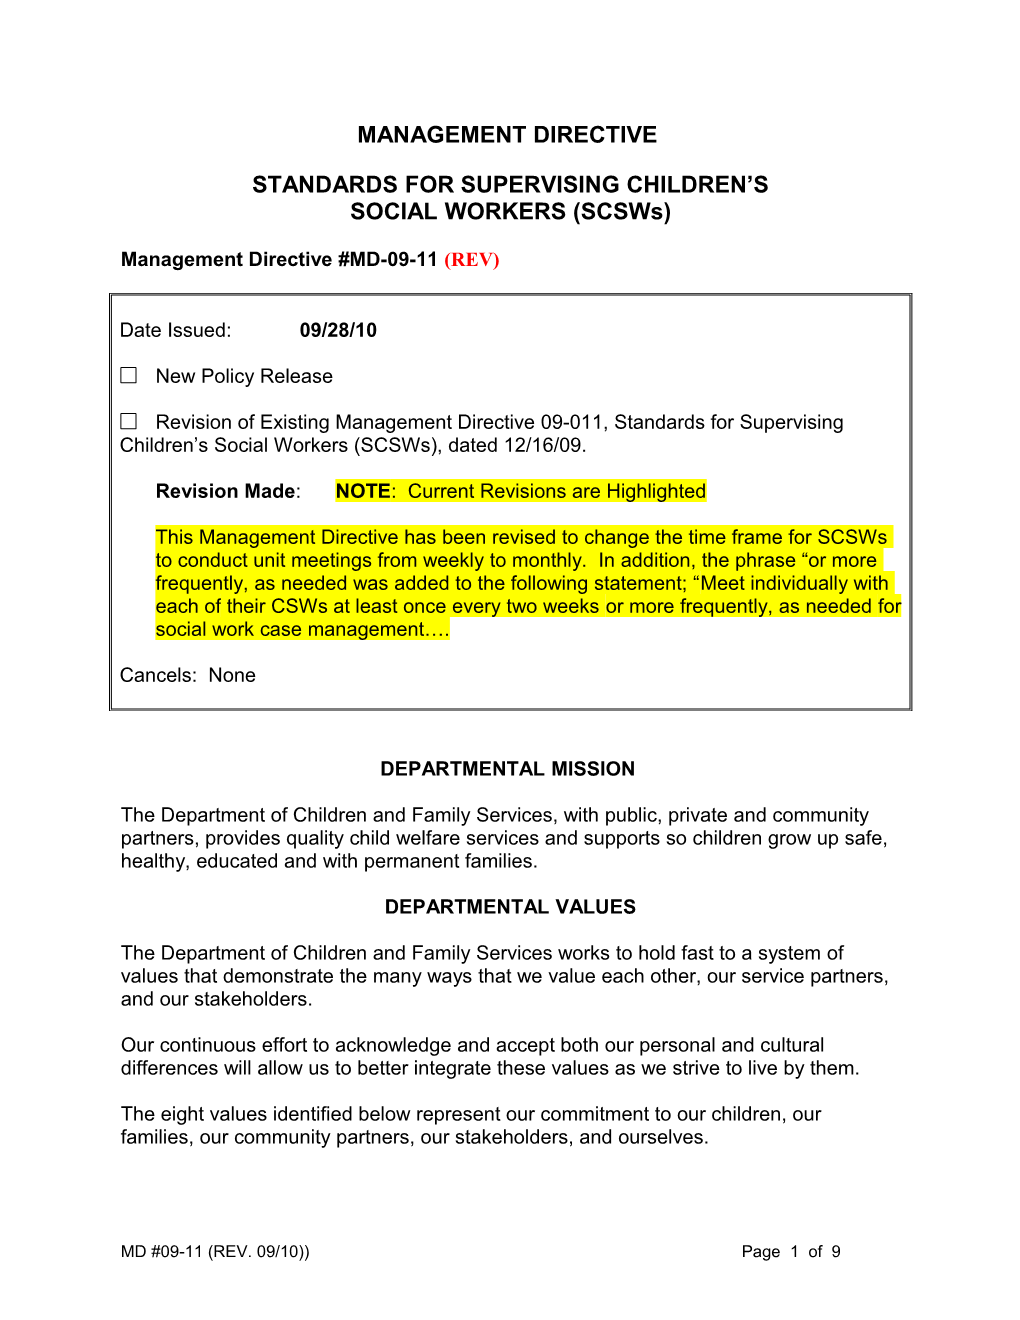 Standards For Supervising Children's Social Workers (SCSW)